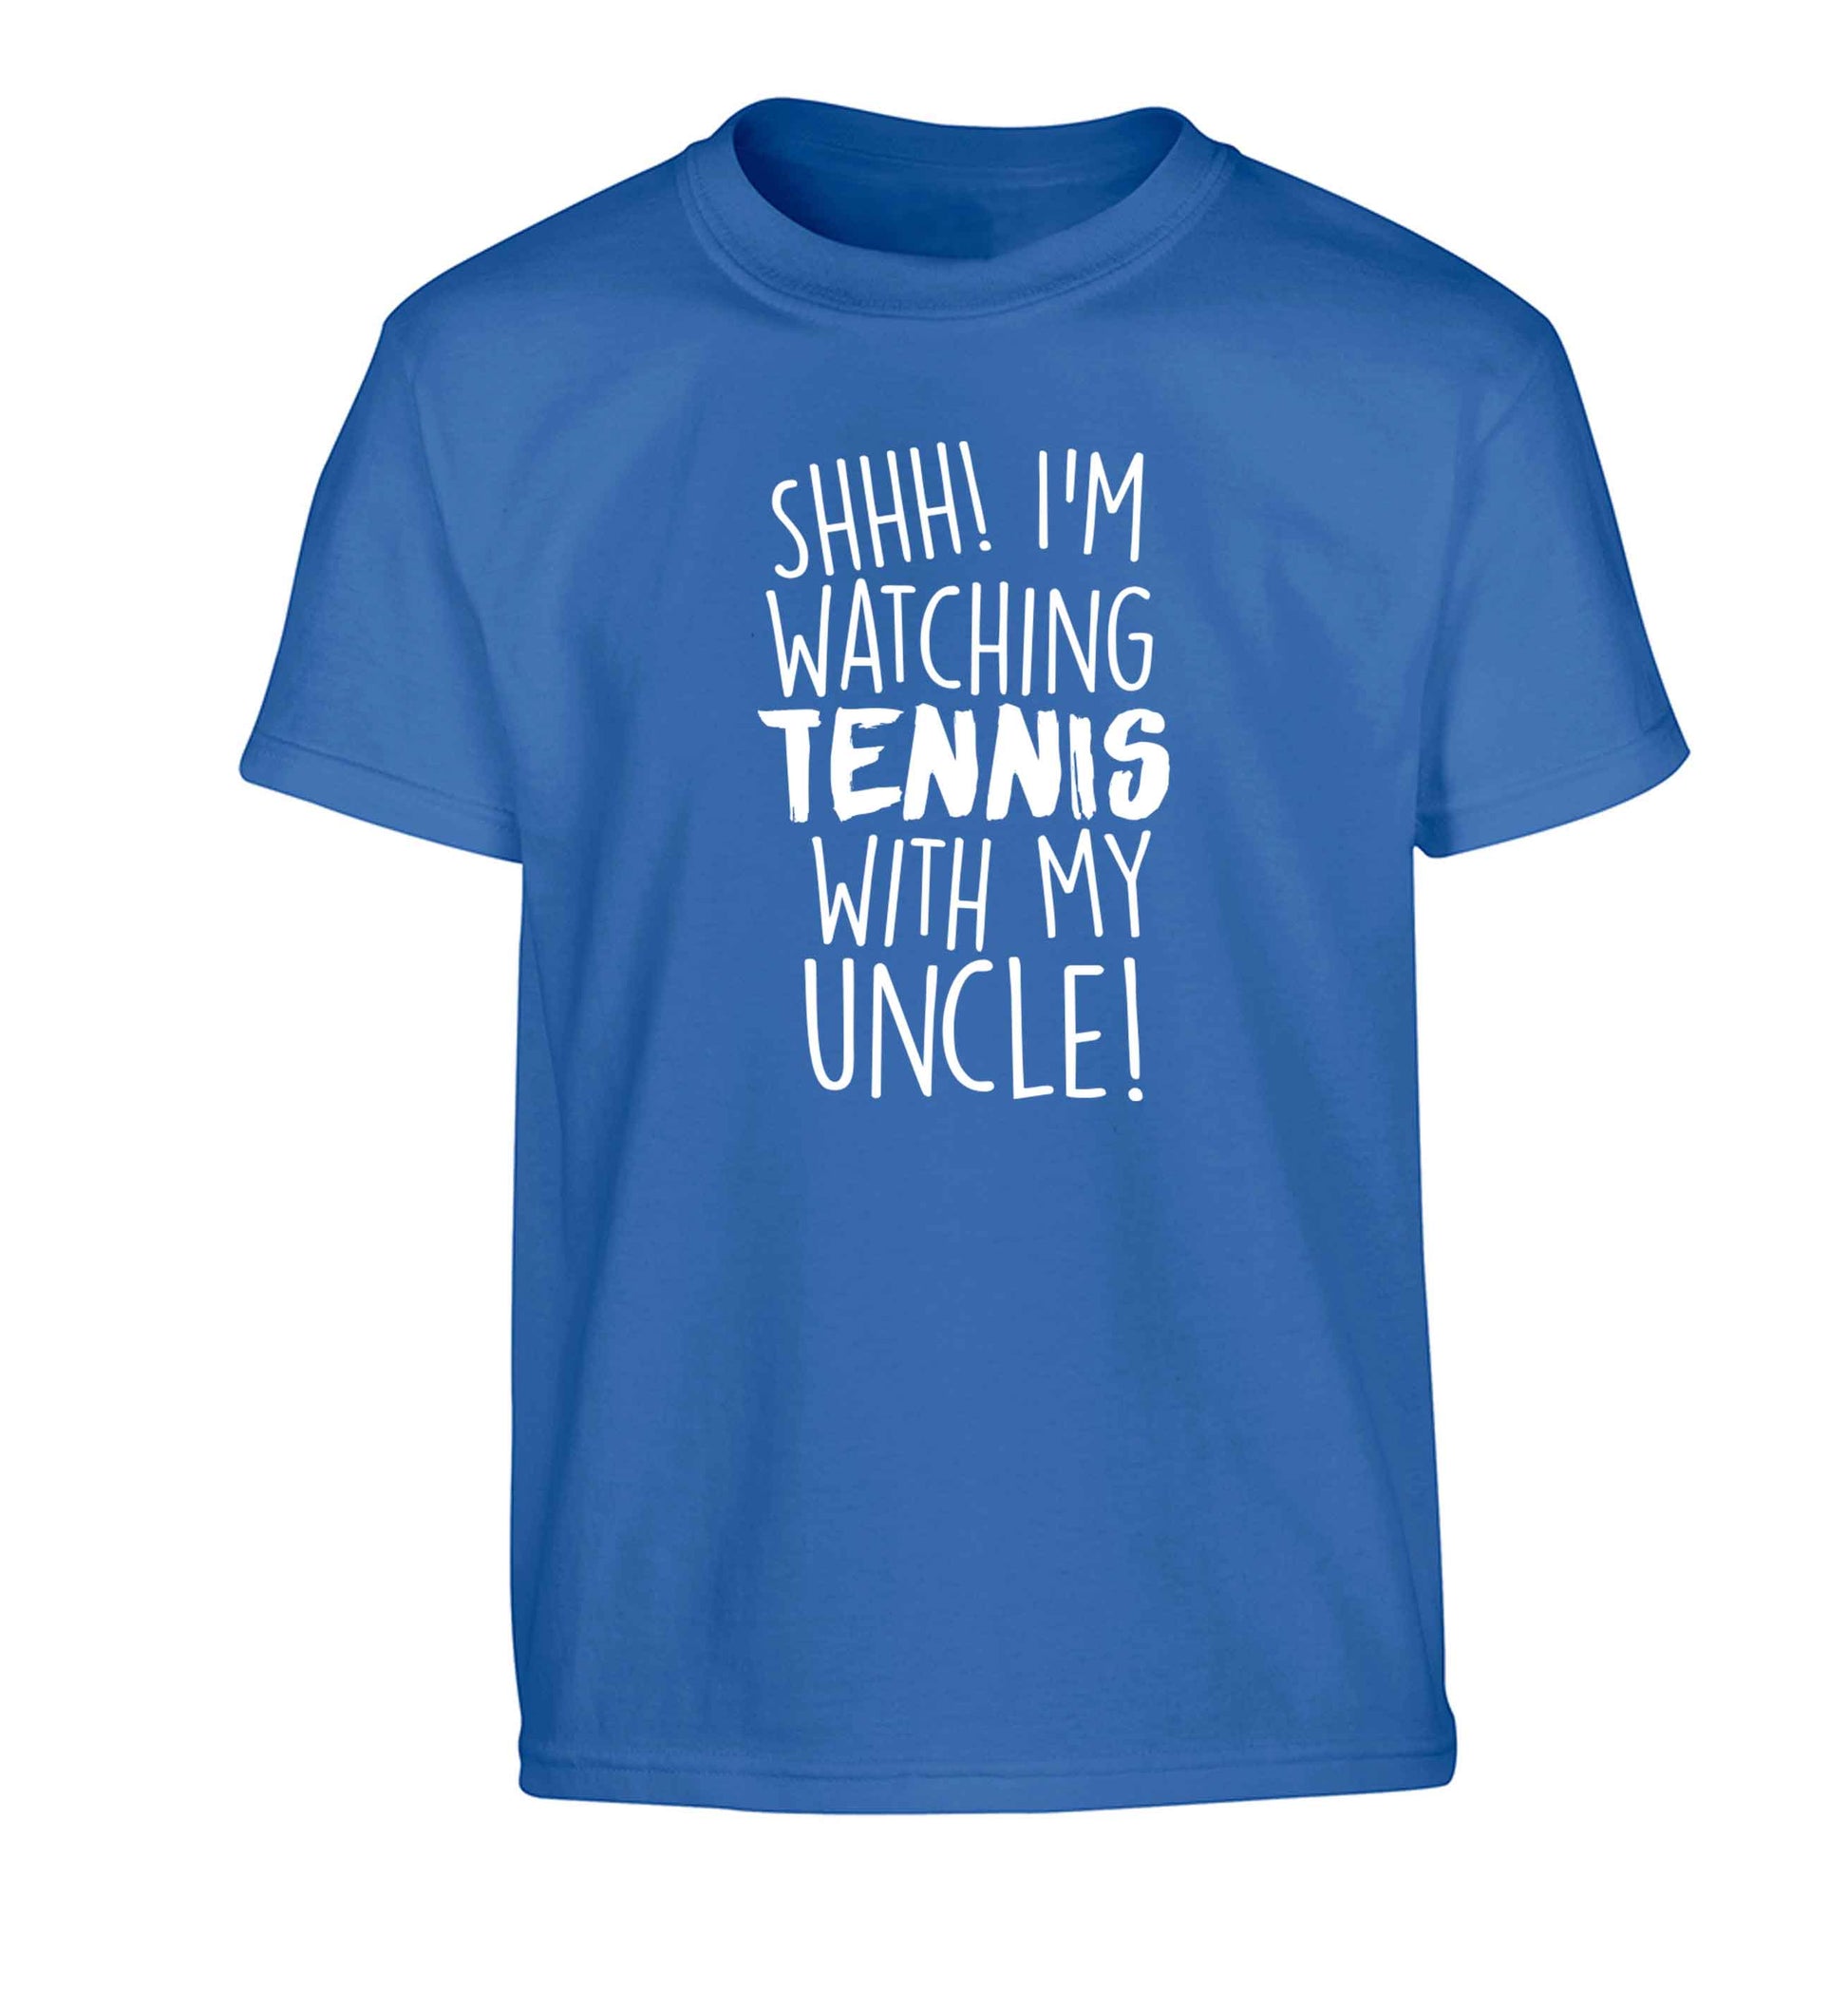 Shh! I'm watching tennis with my uncle! Children's blue Tshirt 12-13 Years